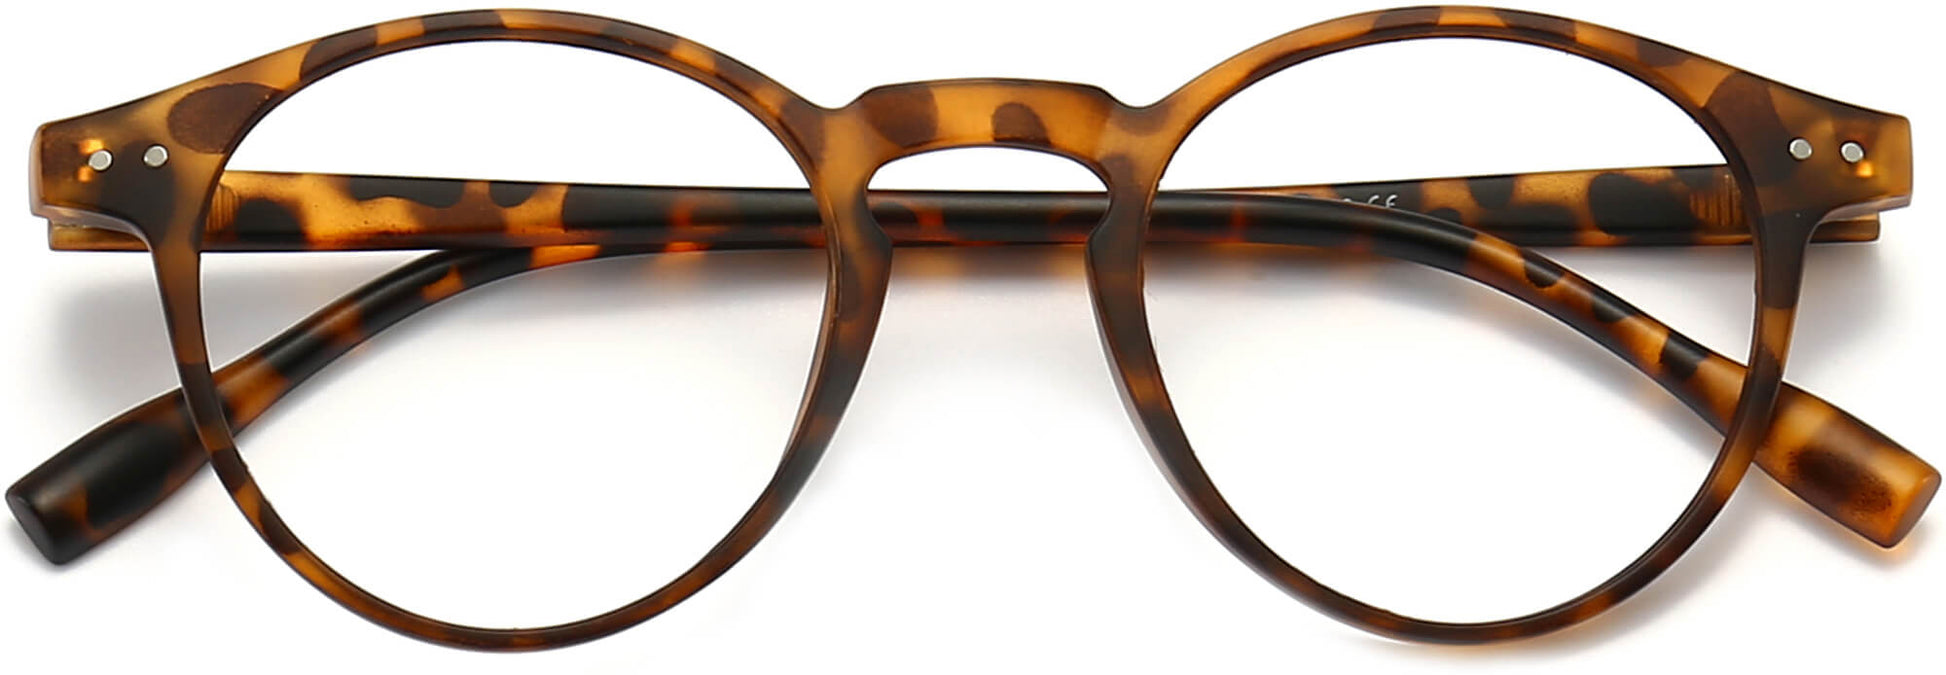 Marcelo Round Tortoise Eyeglasses from ANRRI, closed view